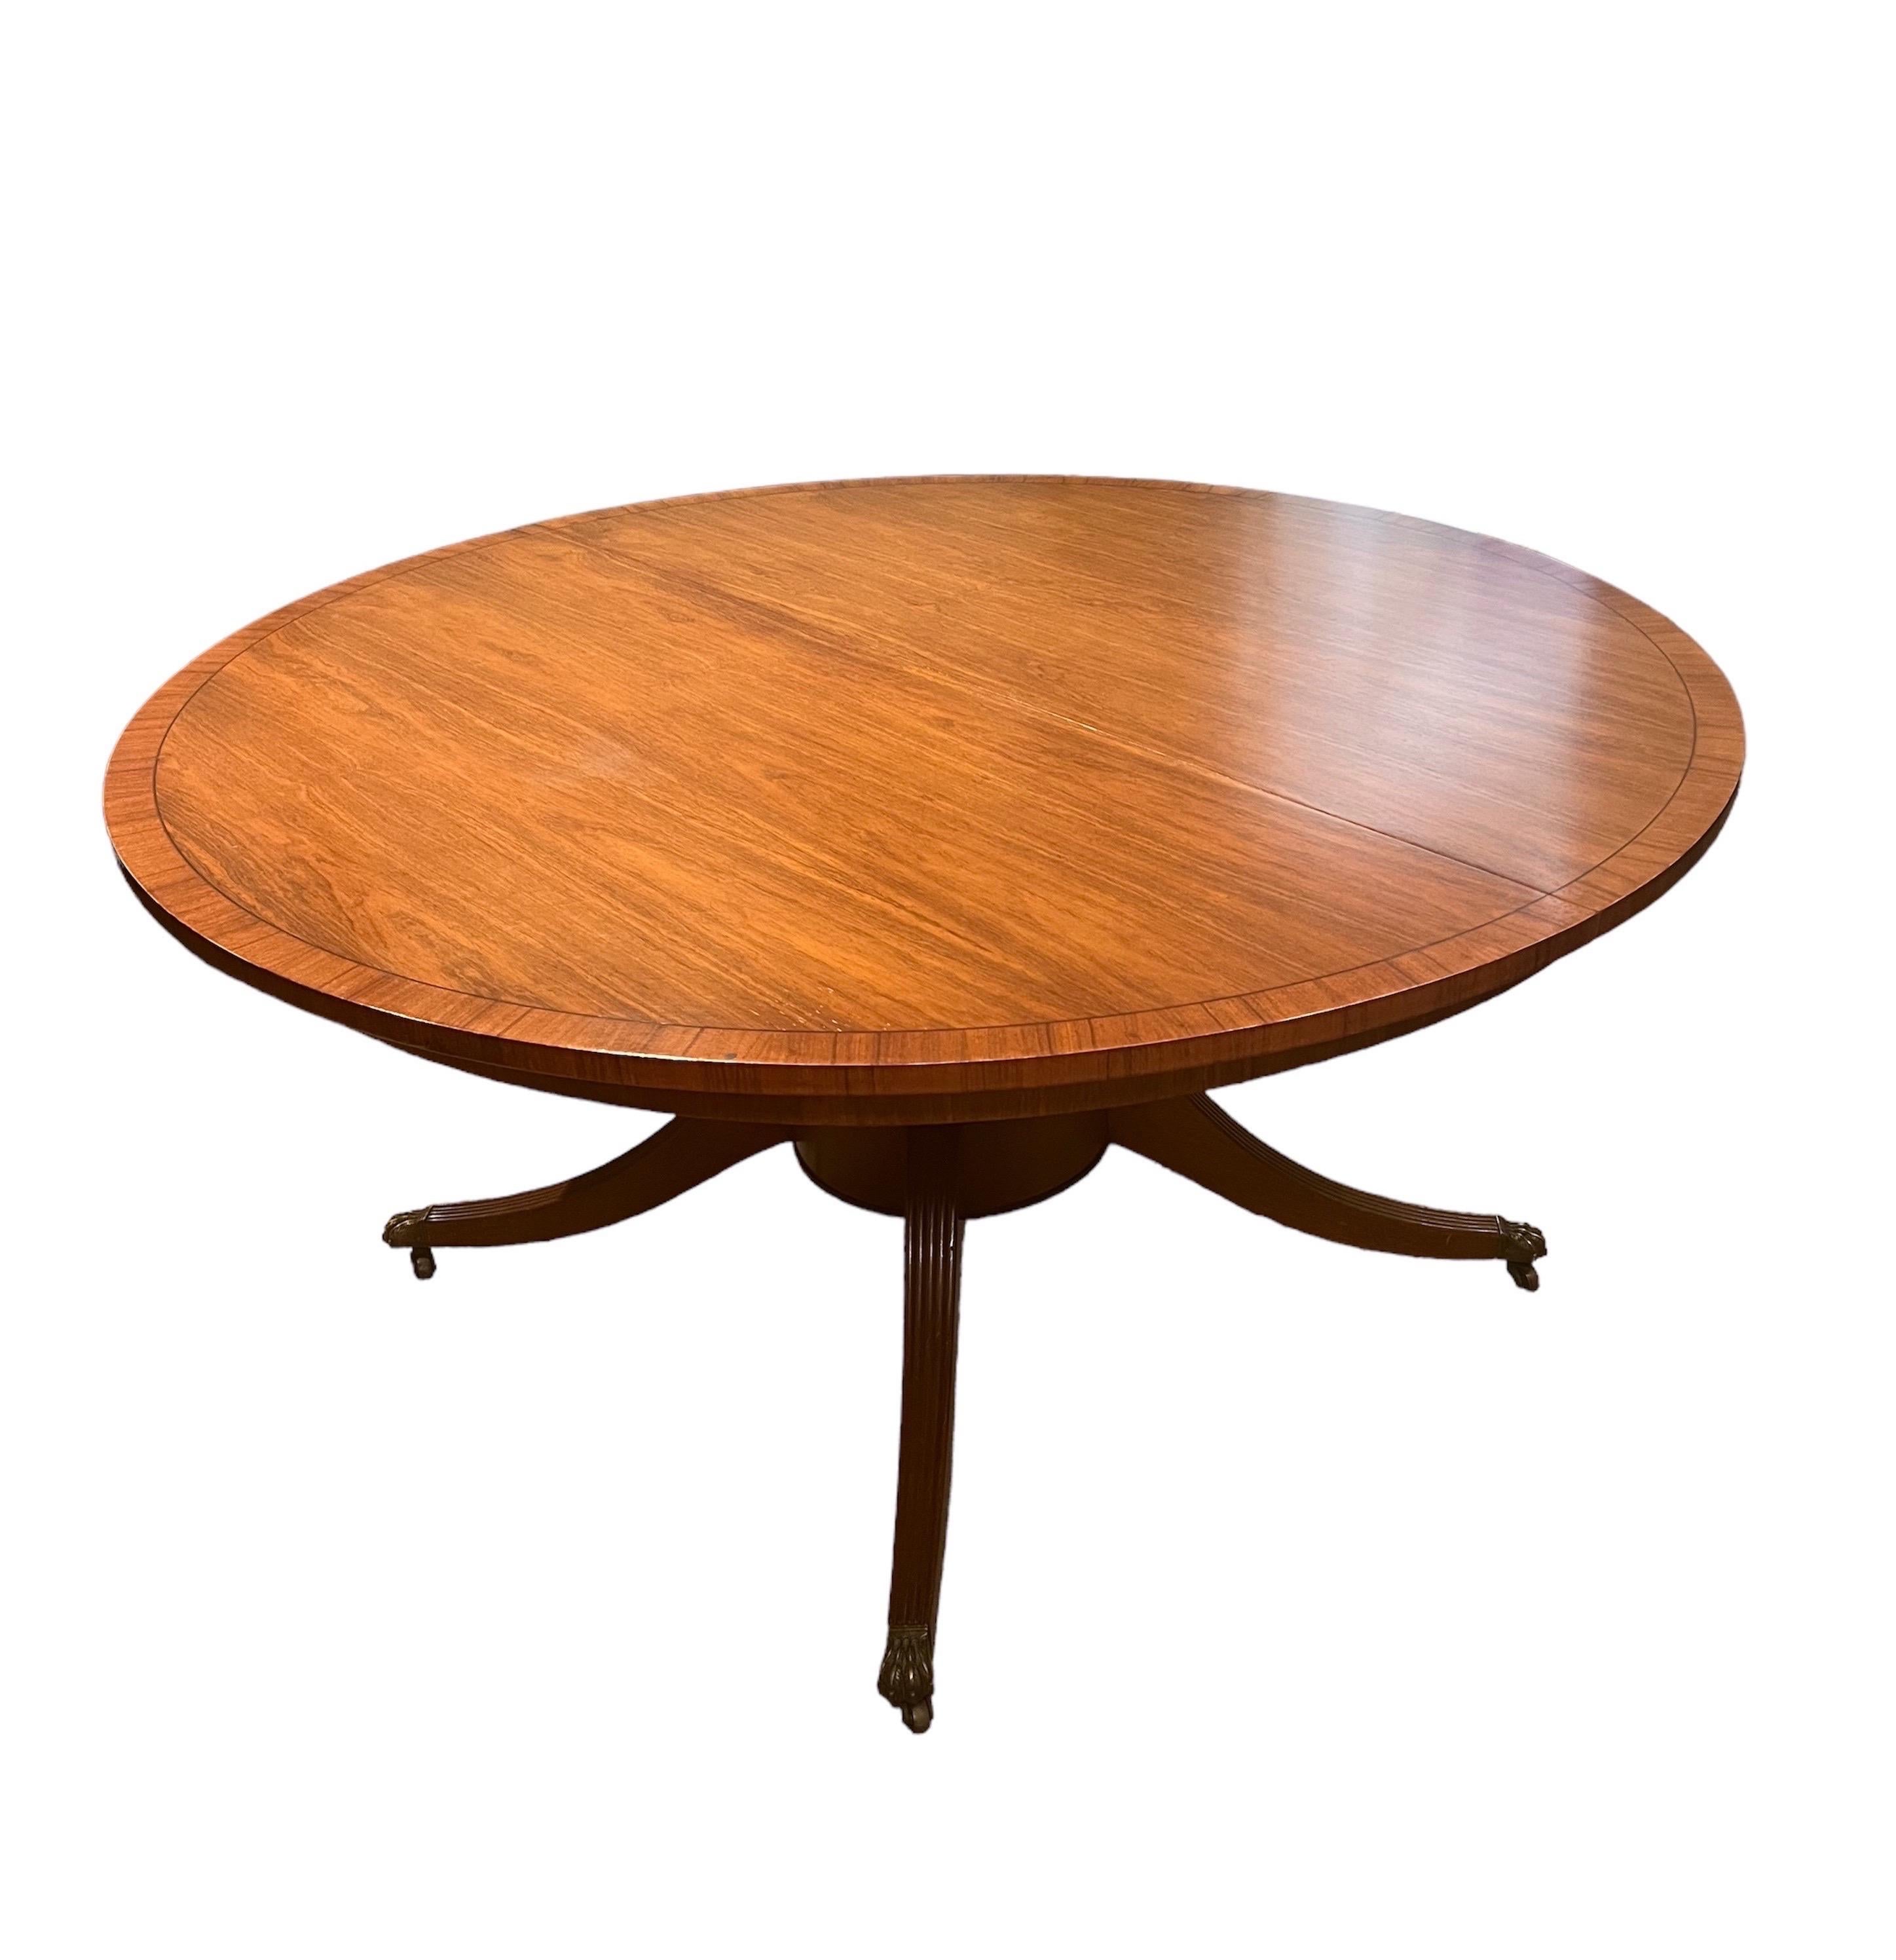 American Regency Style Walnut Extension Dining Table with 3 Leaves & Table Pads For Sale